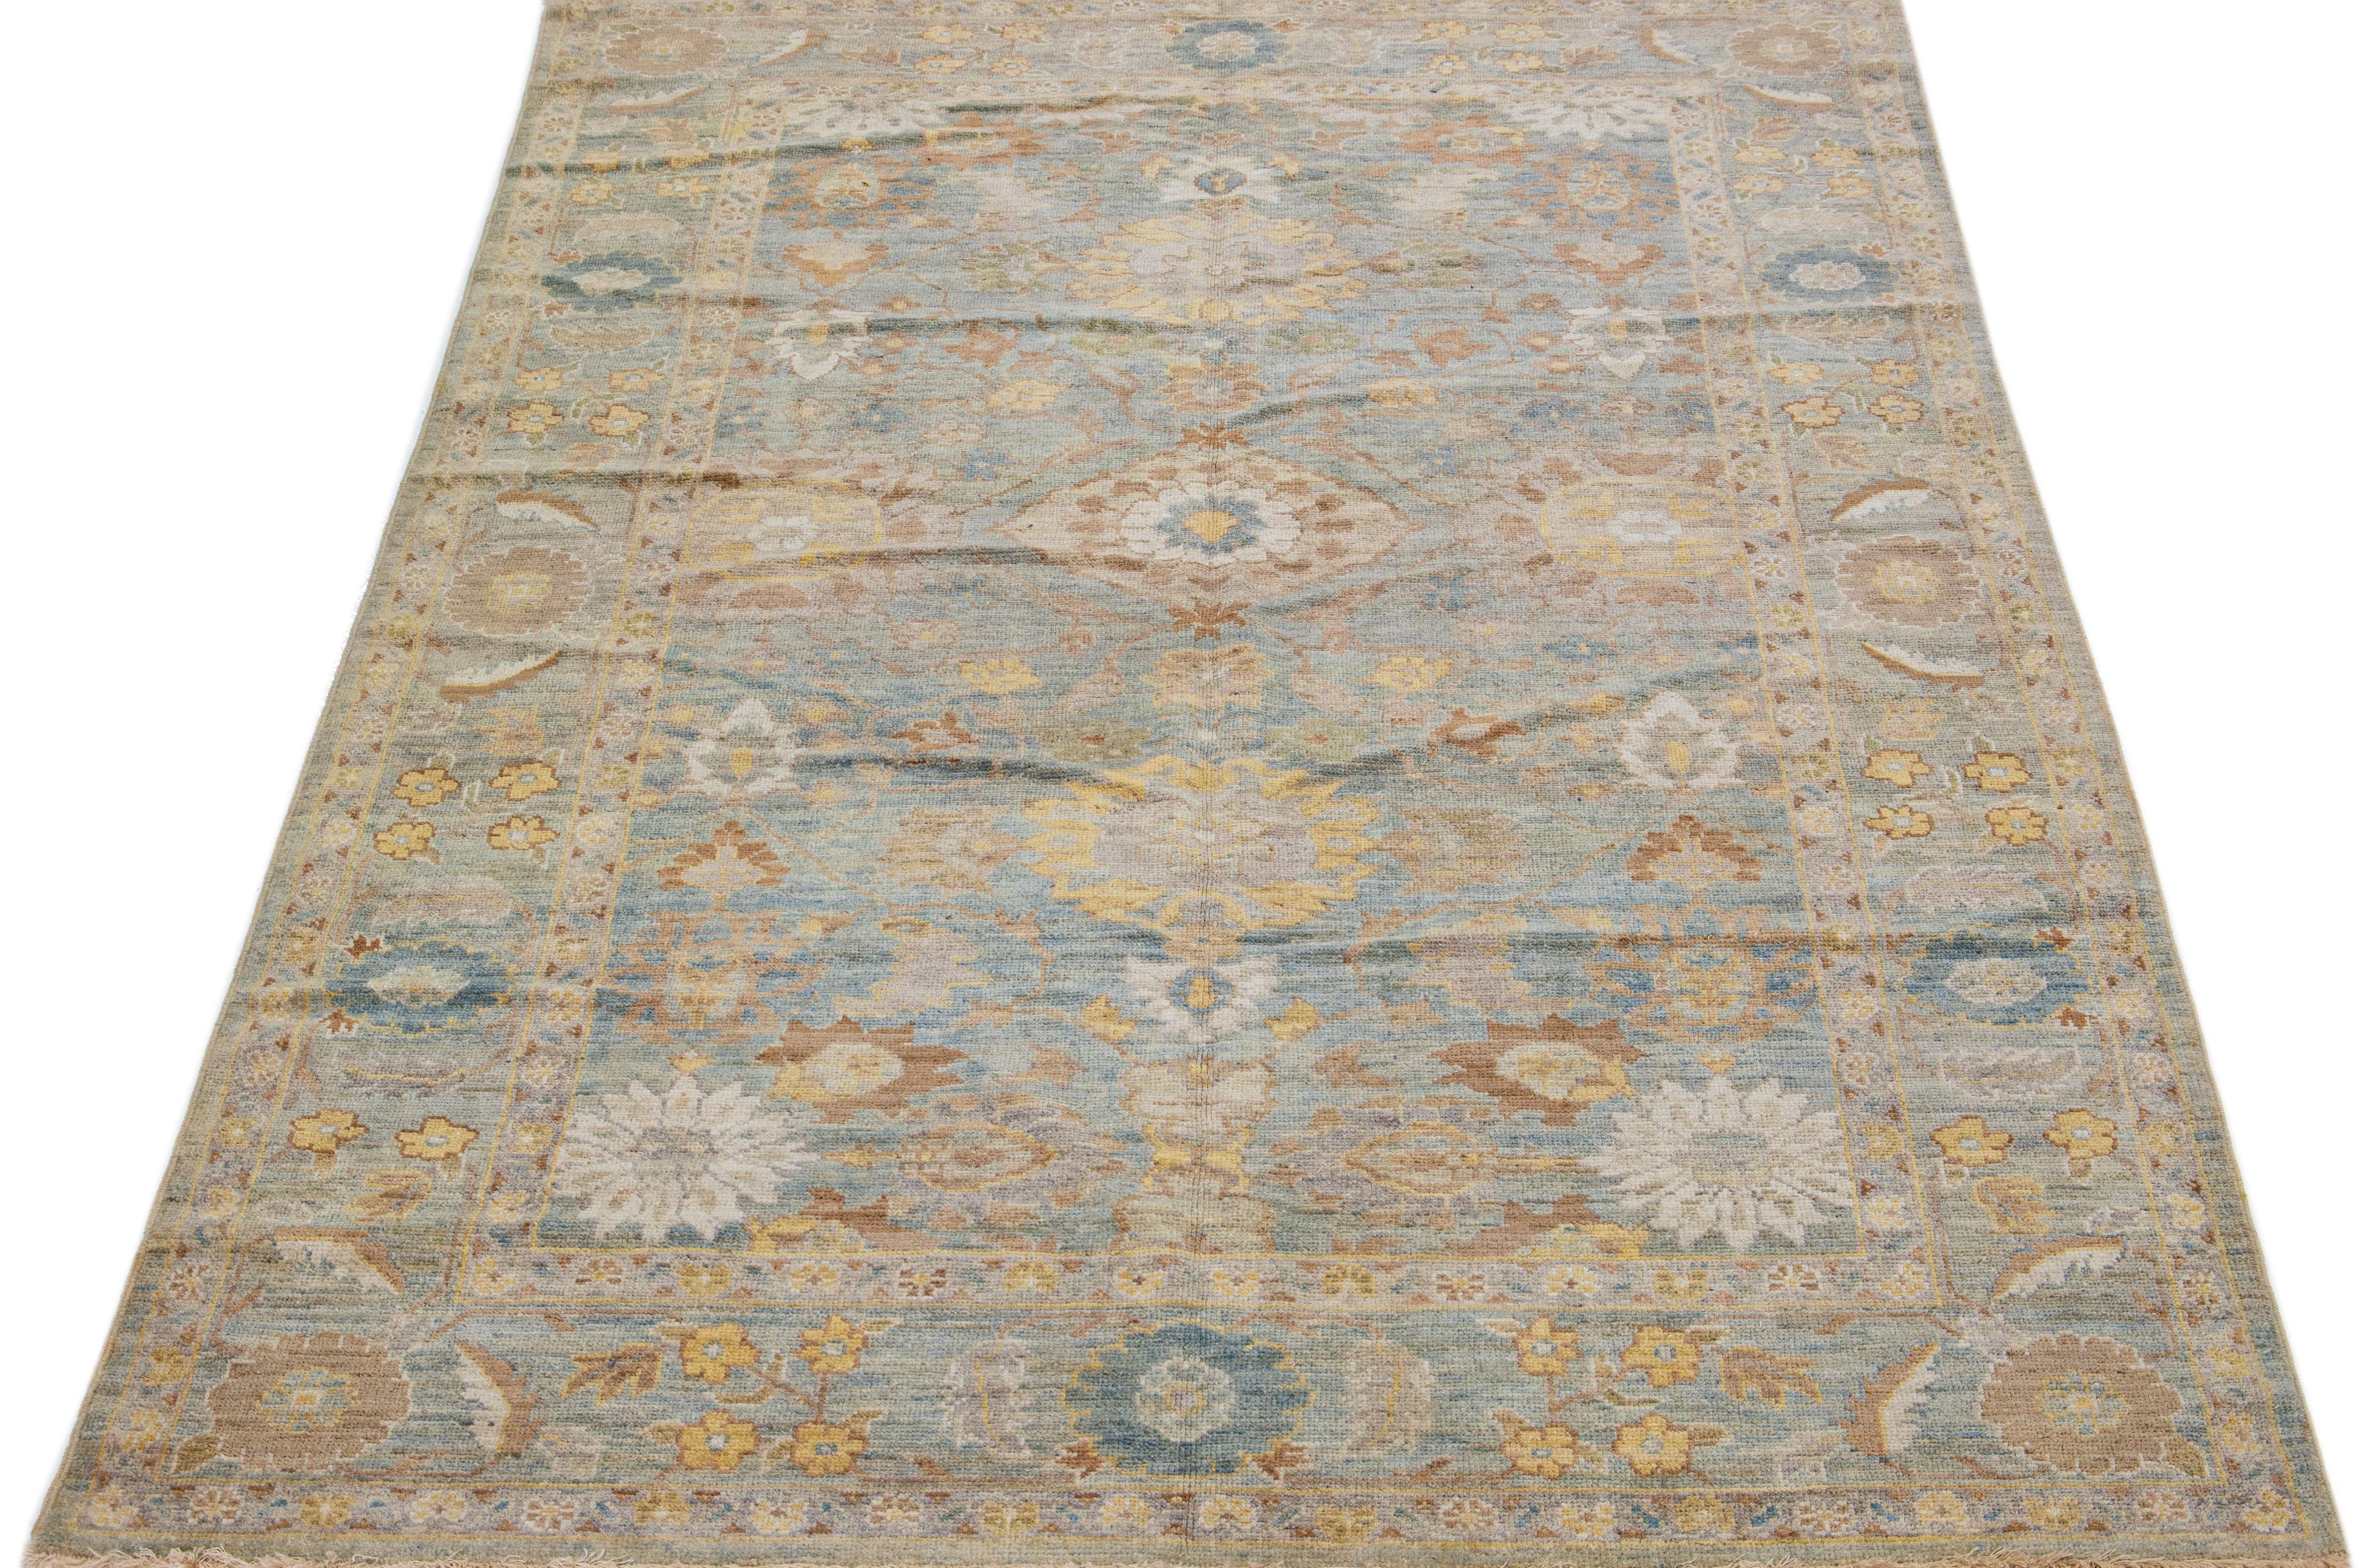 Beautiful modern Sultanabad hand-knotted wool rug with a blue color field. This rug has a designed frame with brown, green, and yellow accents in a gorgeous all-over floral motif.

This rug measures: 6' 2